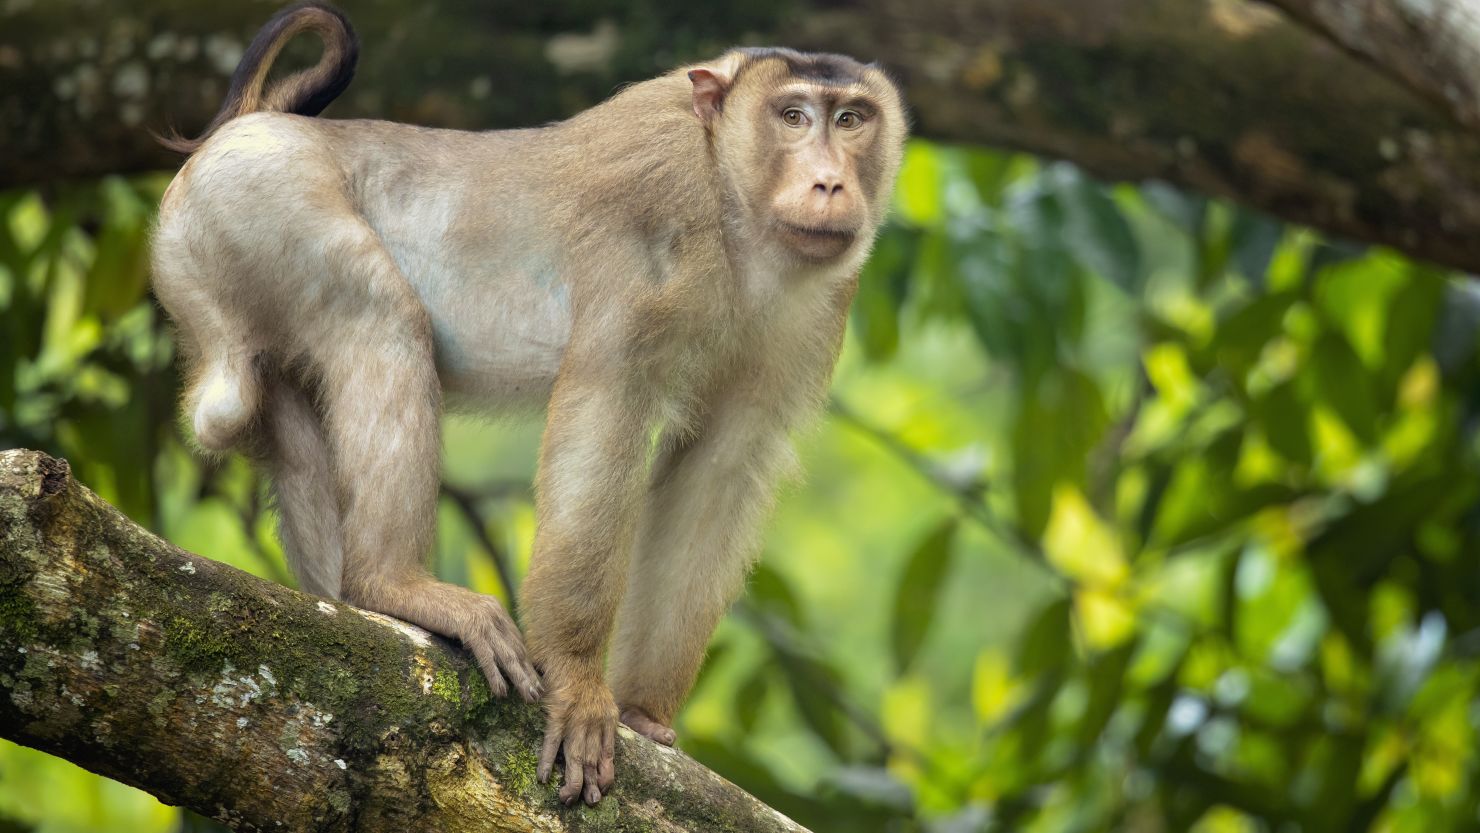 Rat-eating macaques could boost palm oil sustainability in Malaysia | CNN